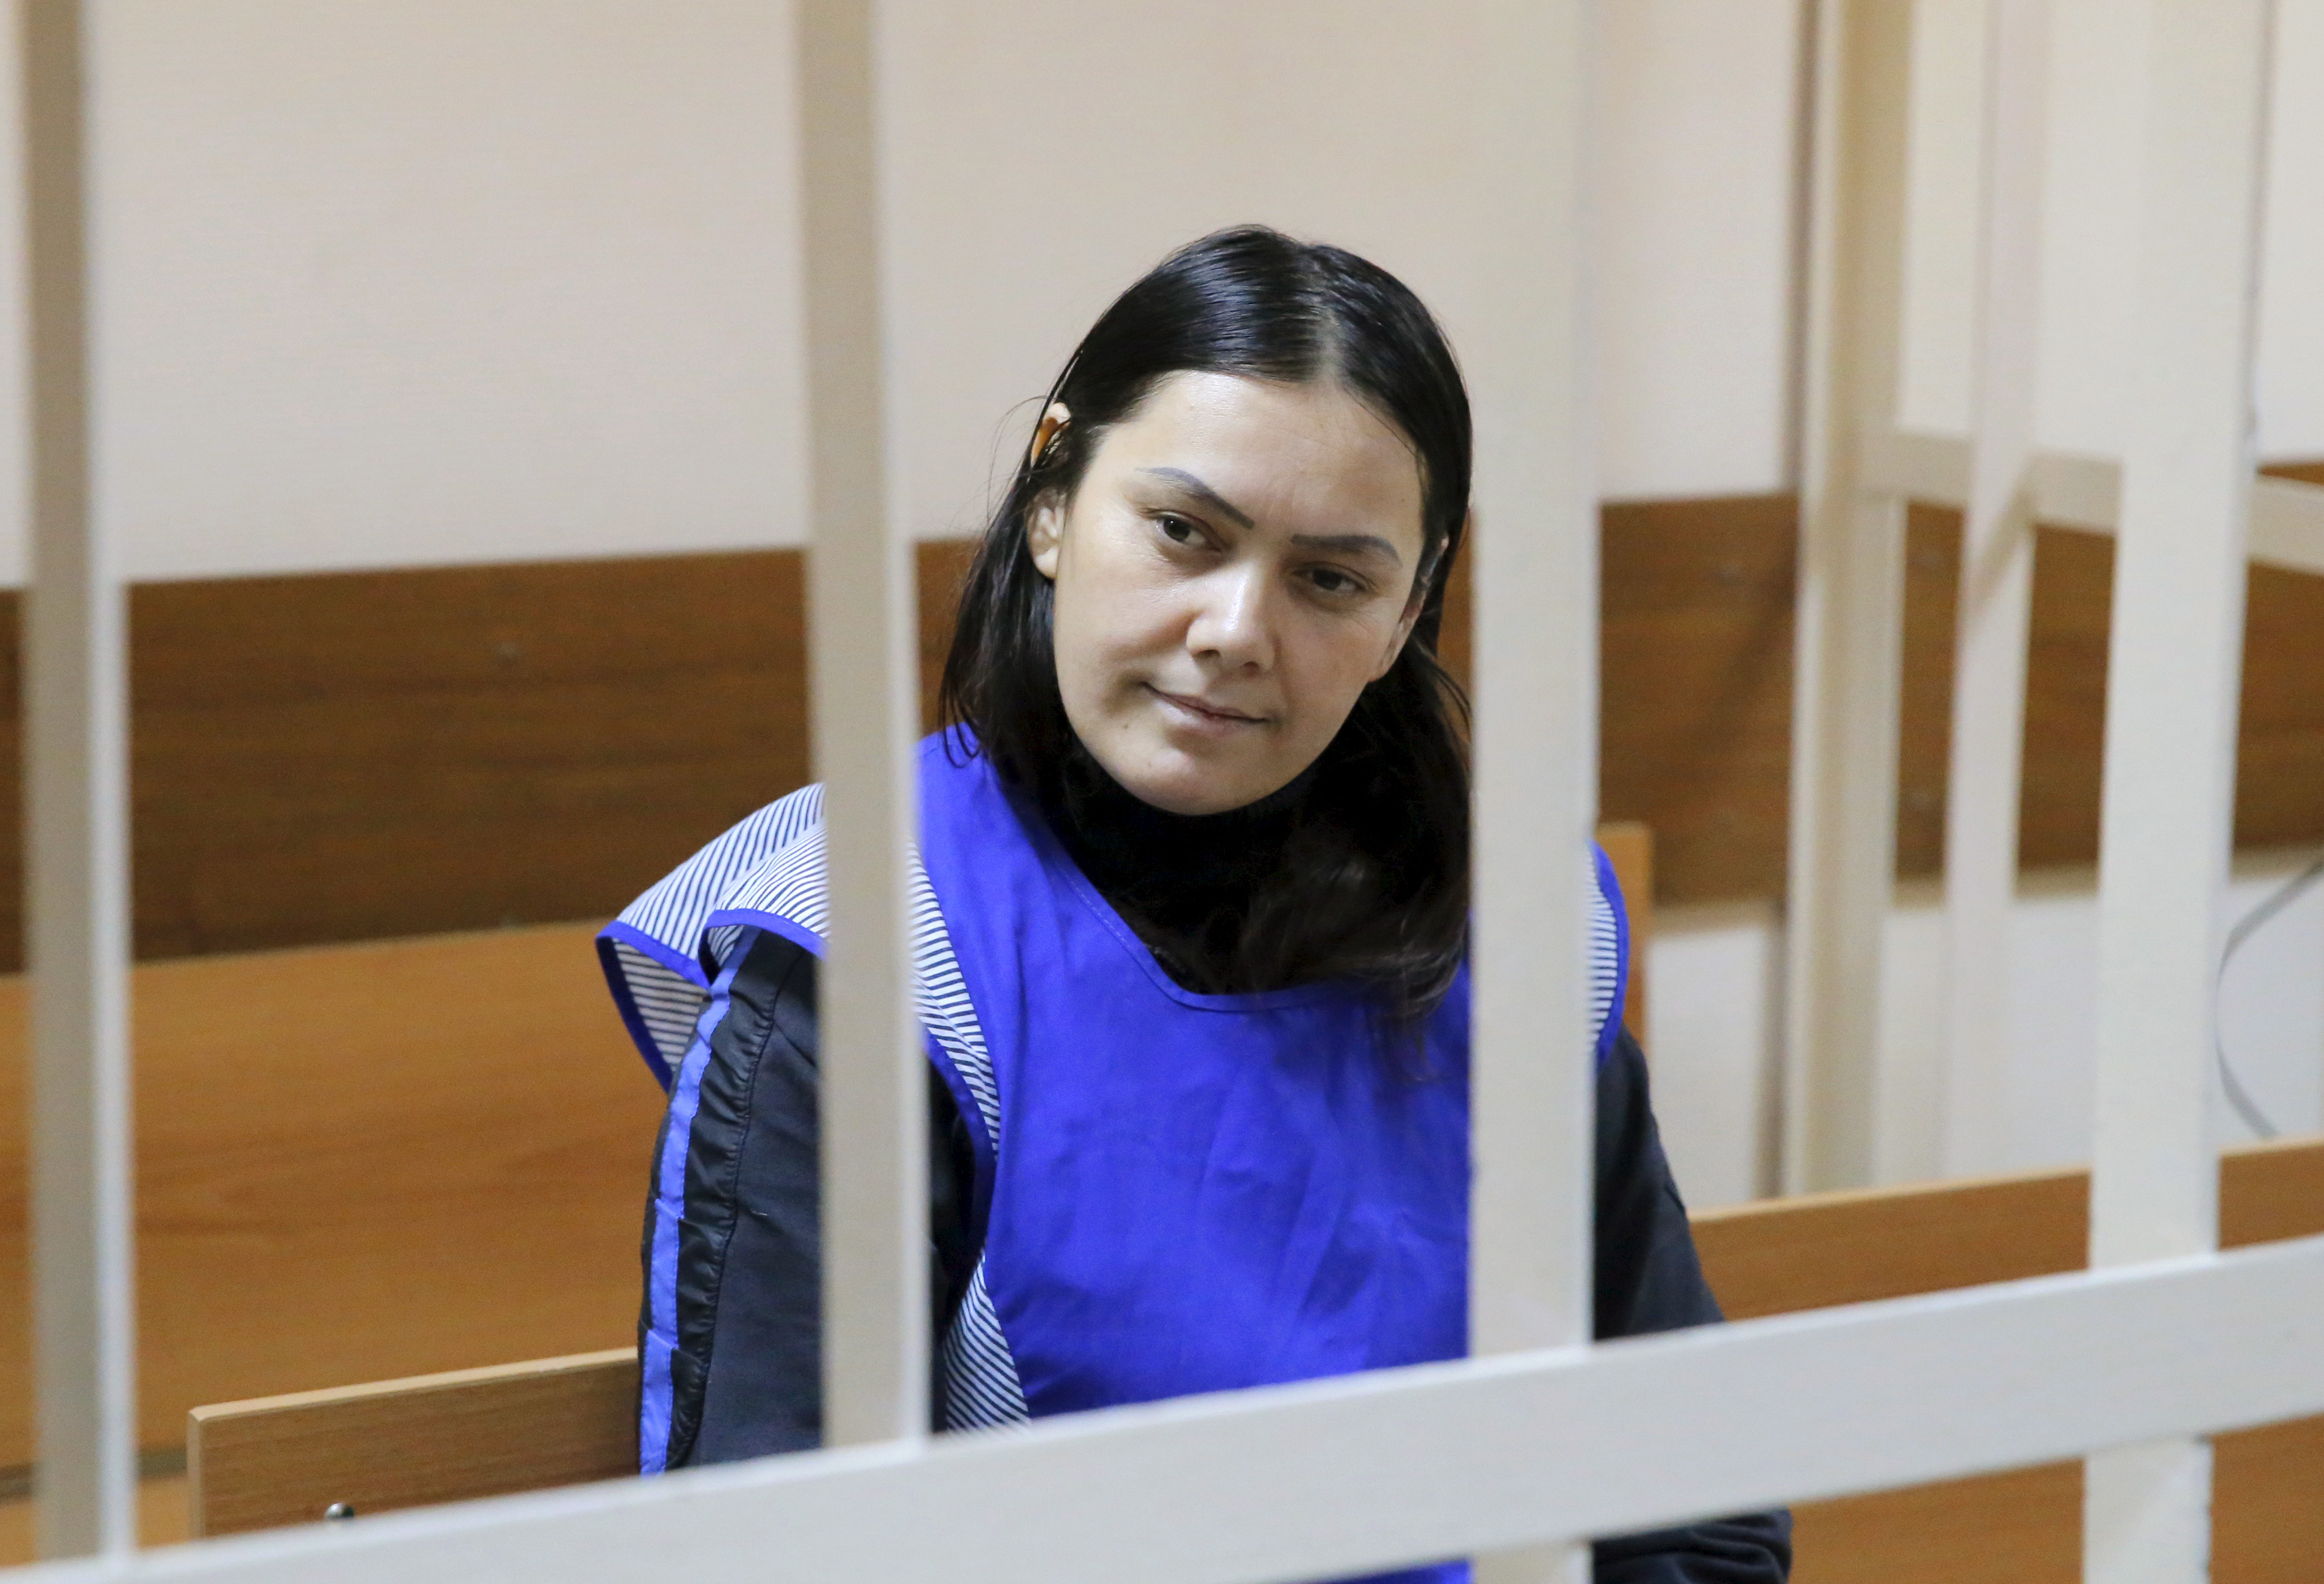 Gulchekhra Bobokulova attends a court hearing in Moscow, Russia, on March 2, 2016. (Maxim Shemetov/Reuters)